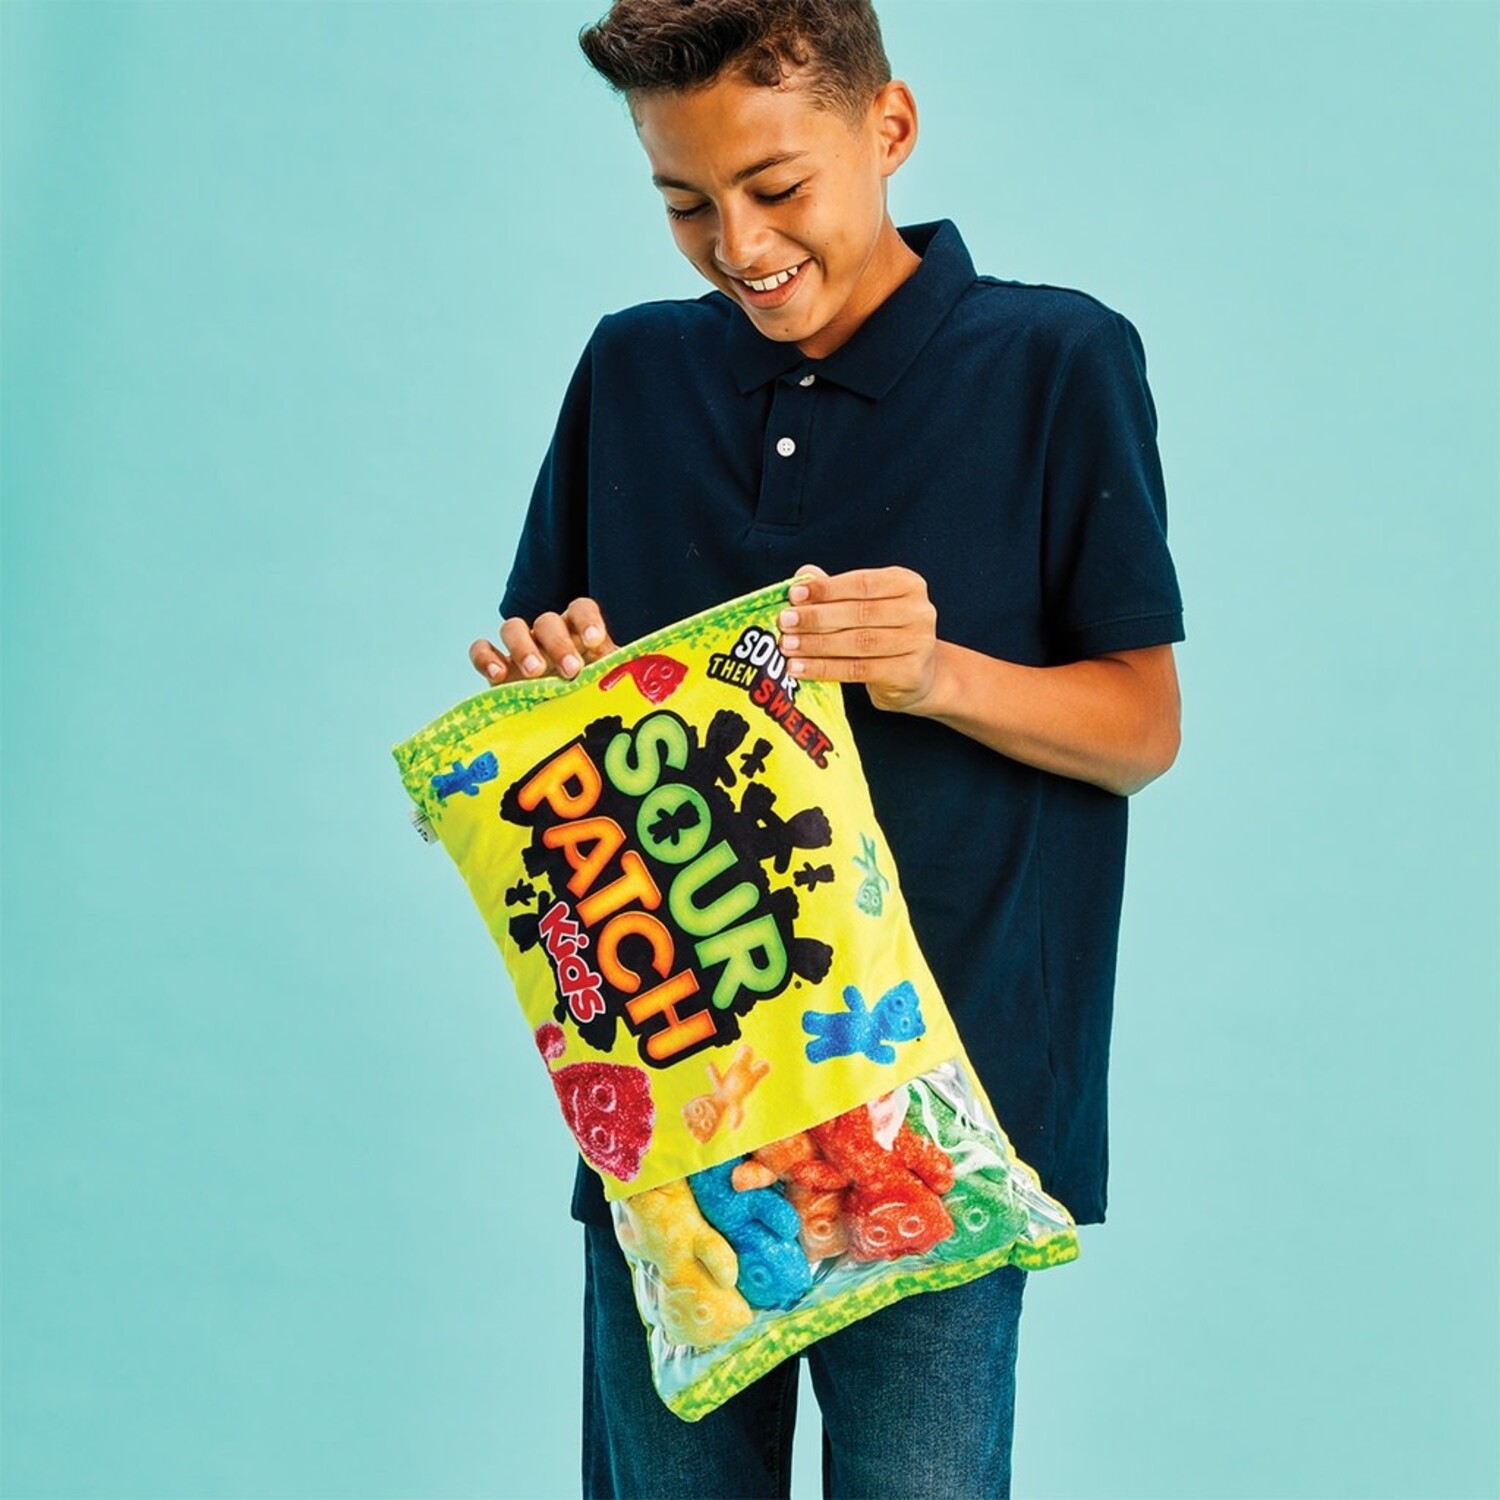 Sour Patch Kids Package Plush - Mudpuddles Toys and Books